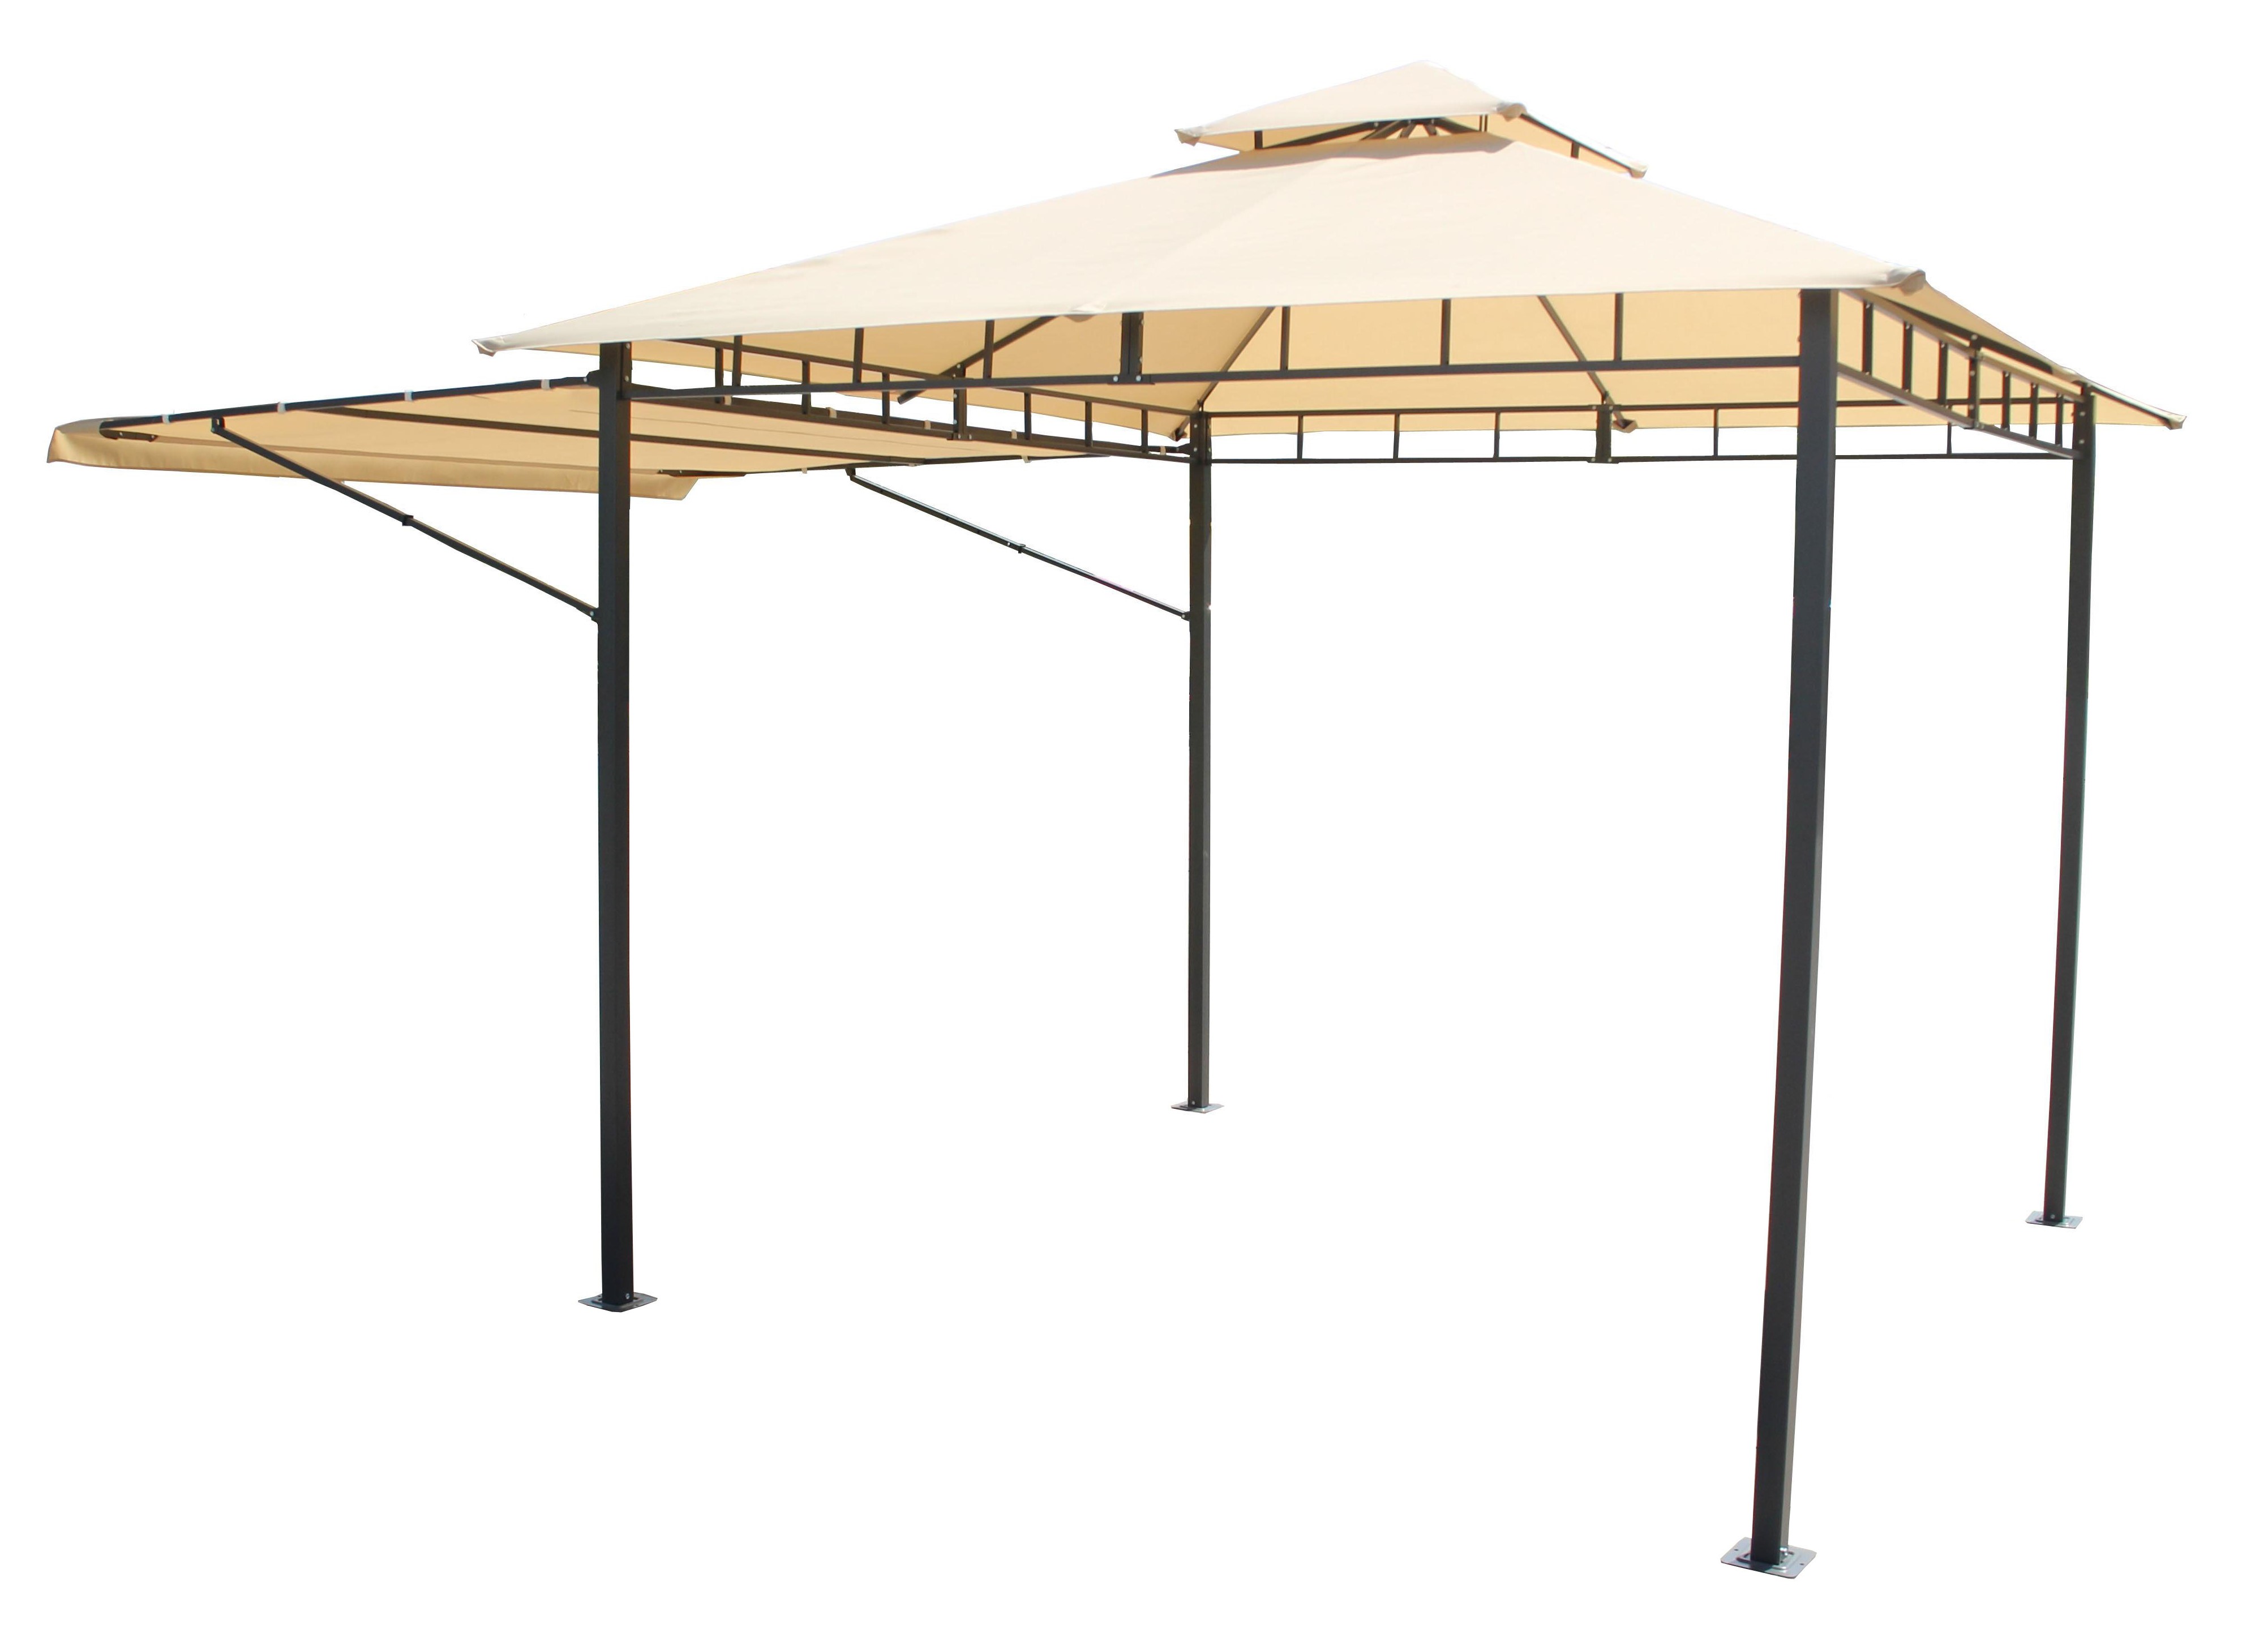 MOON METAL GAZEBO 3X3M 2,1 WITH AWNING - AWNING COVER